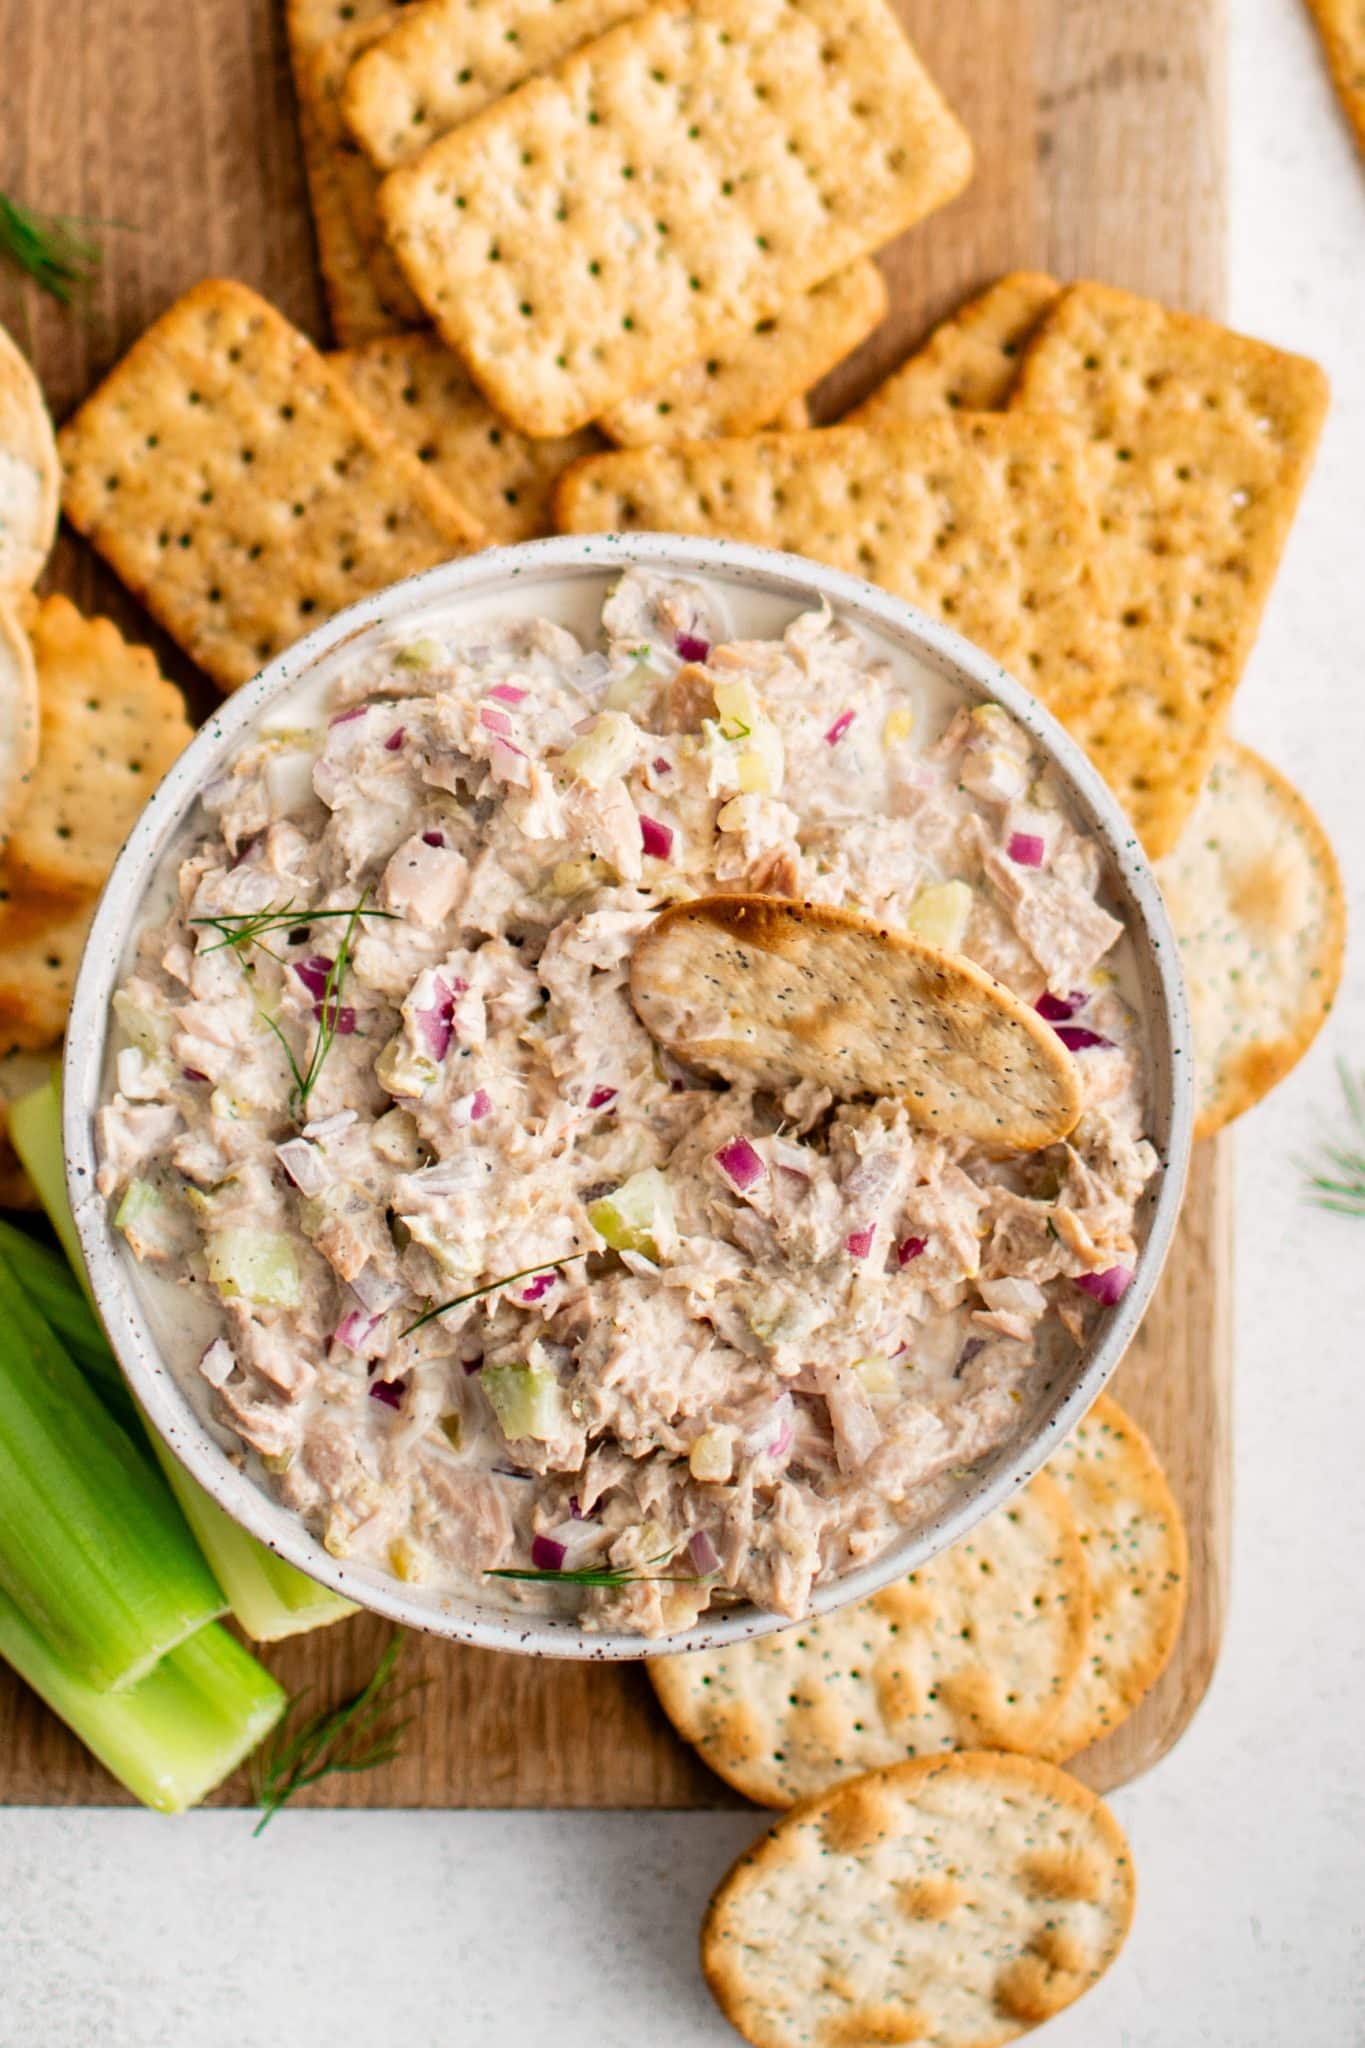 White bowl filled with homemade classic tuna salad on a large cutting board surrounded by whole grain crackers, celery sticks, water crackers, and butter crackers.